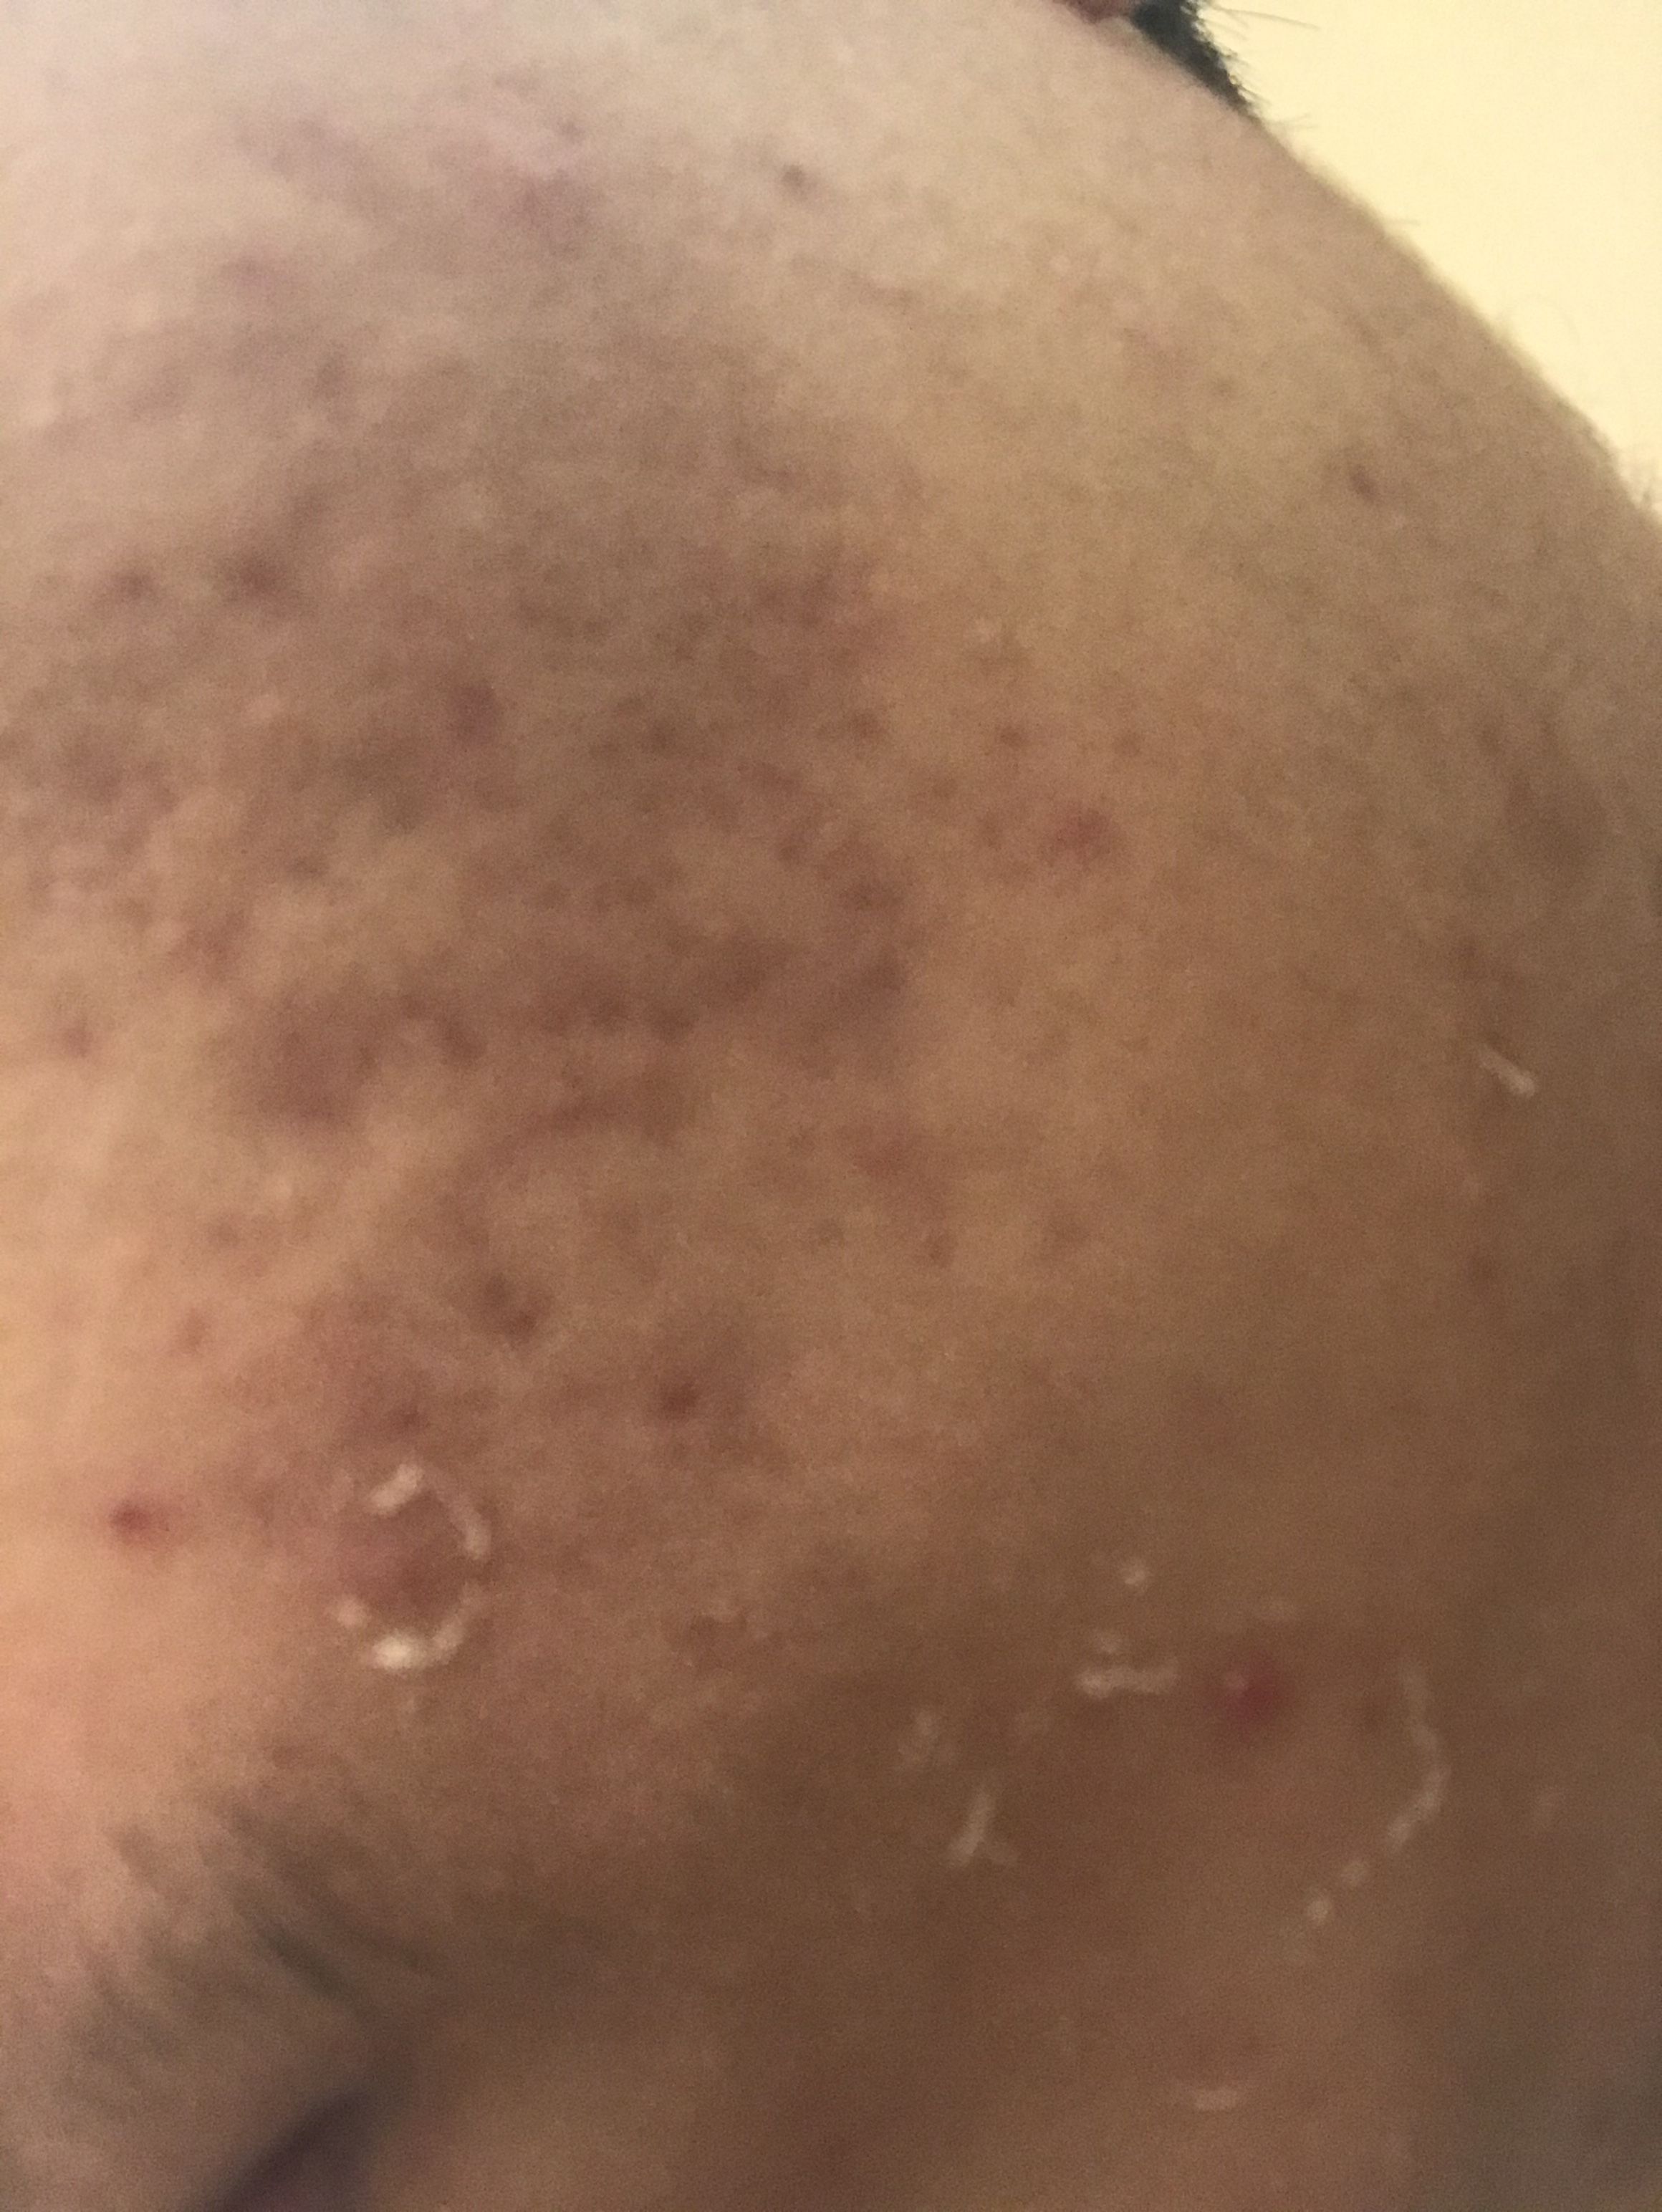 Help needed getting rid of acne/acne scars! - Scar treatments - Acne.org